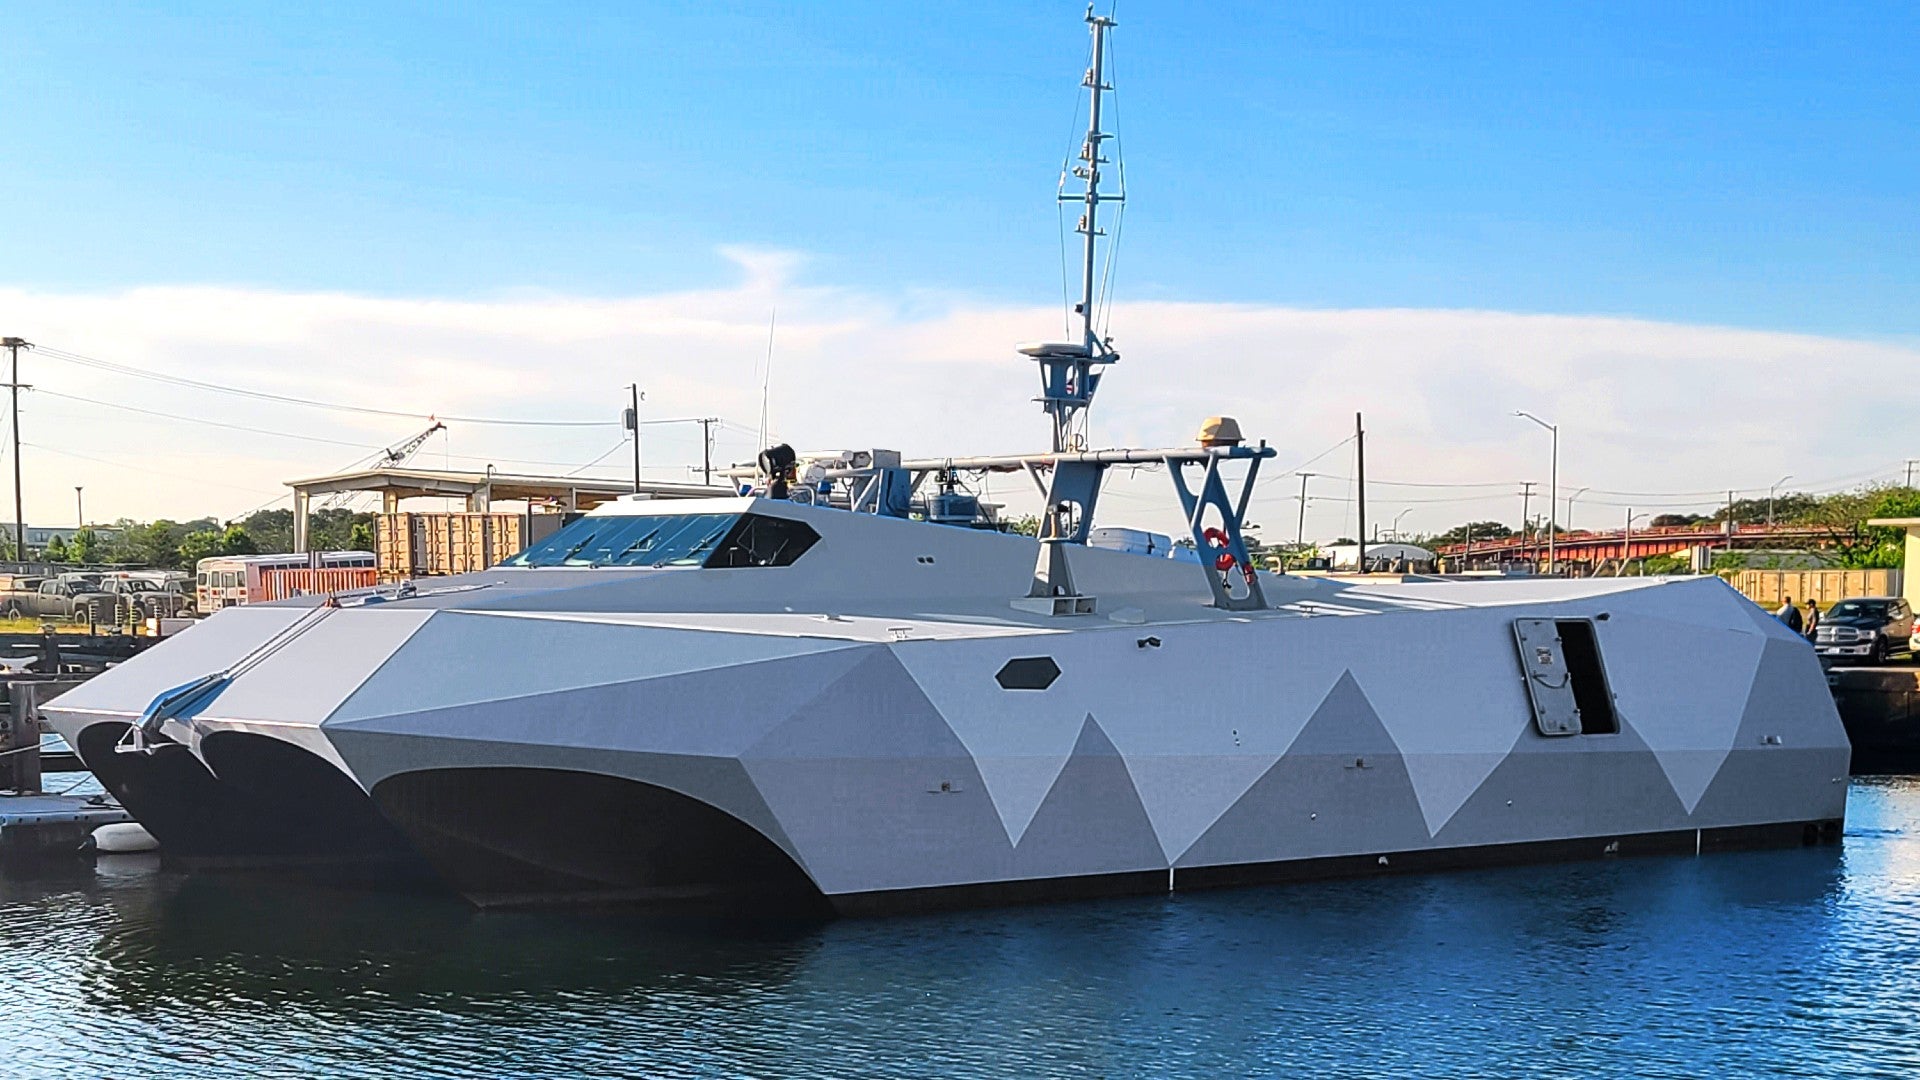 The U.S. Navy’s exotic M80 Stiletto experimental testbed ship has successfully completed a six-week demonstration of an automated 360-degree detect-